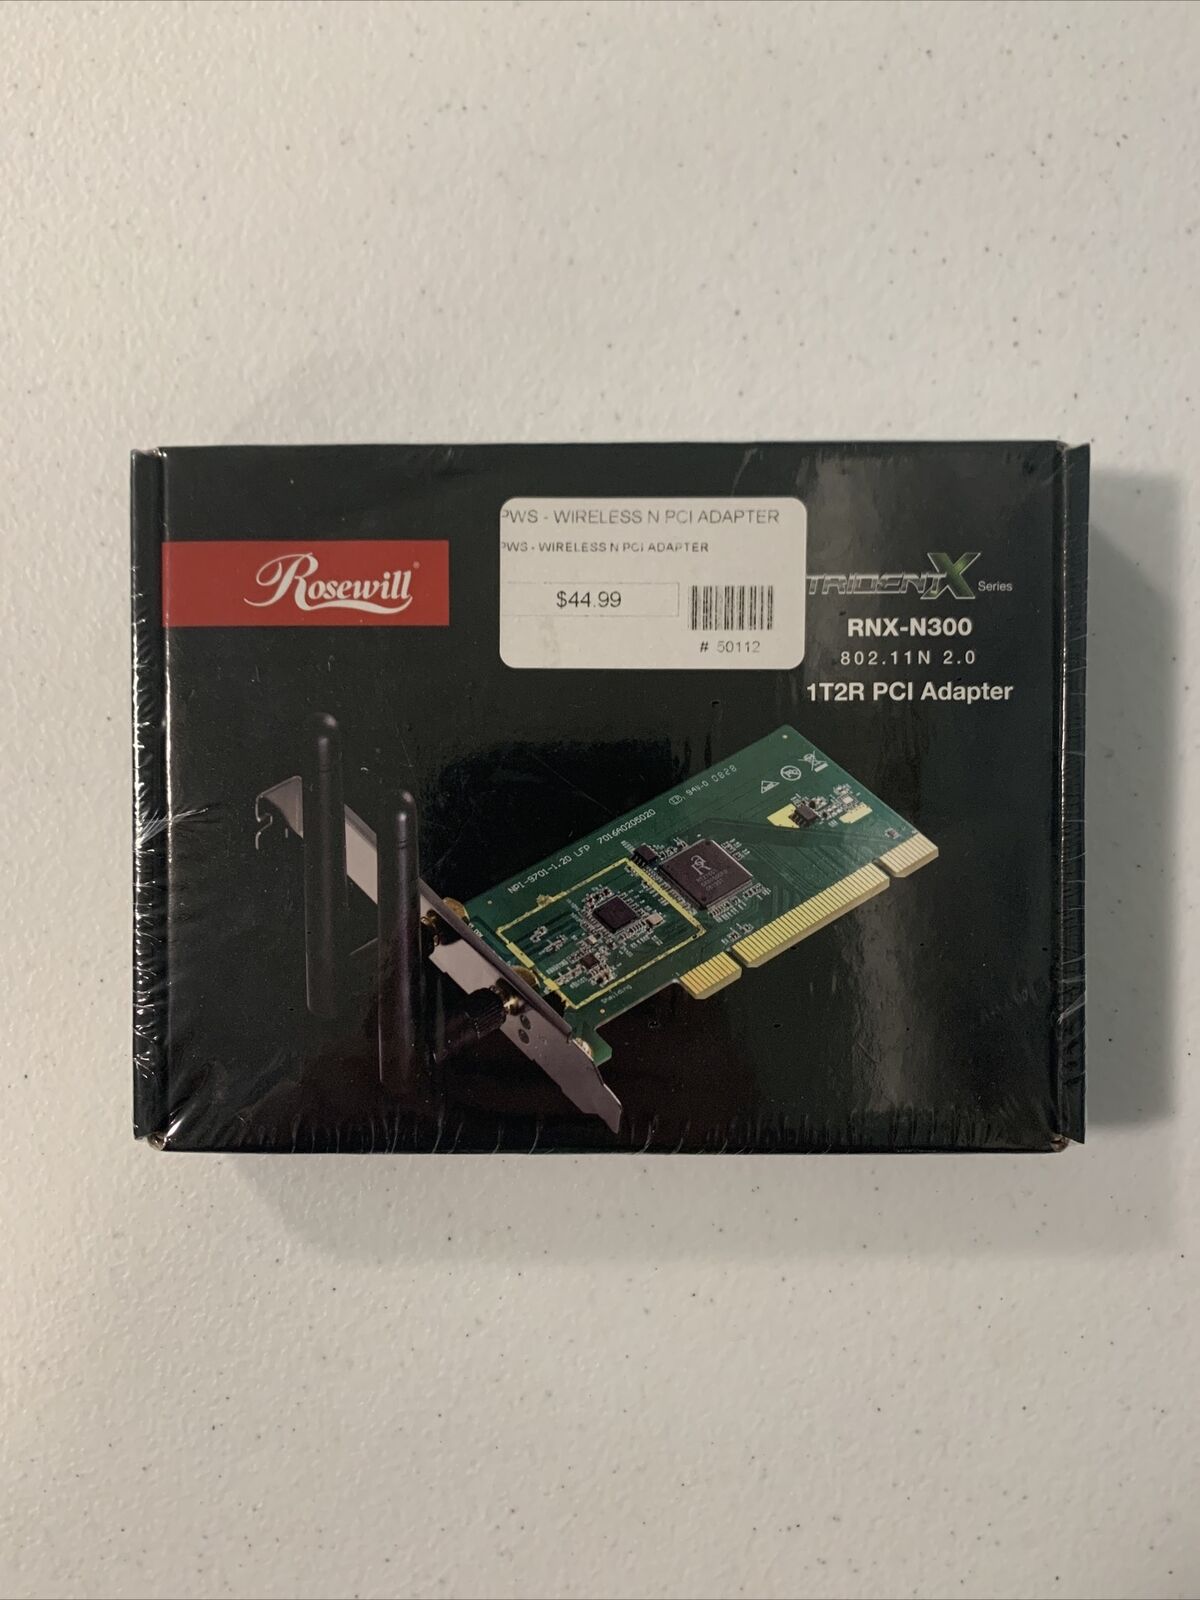 Brand New Rosewill PWS Wireless N PCI Adapter RNX-N300 Sealed